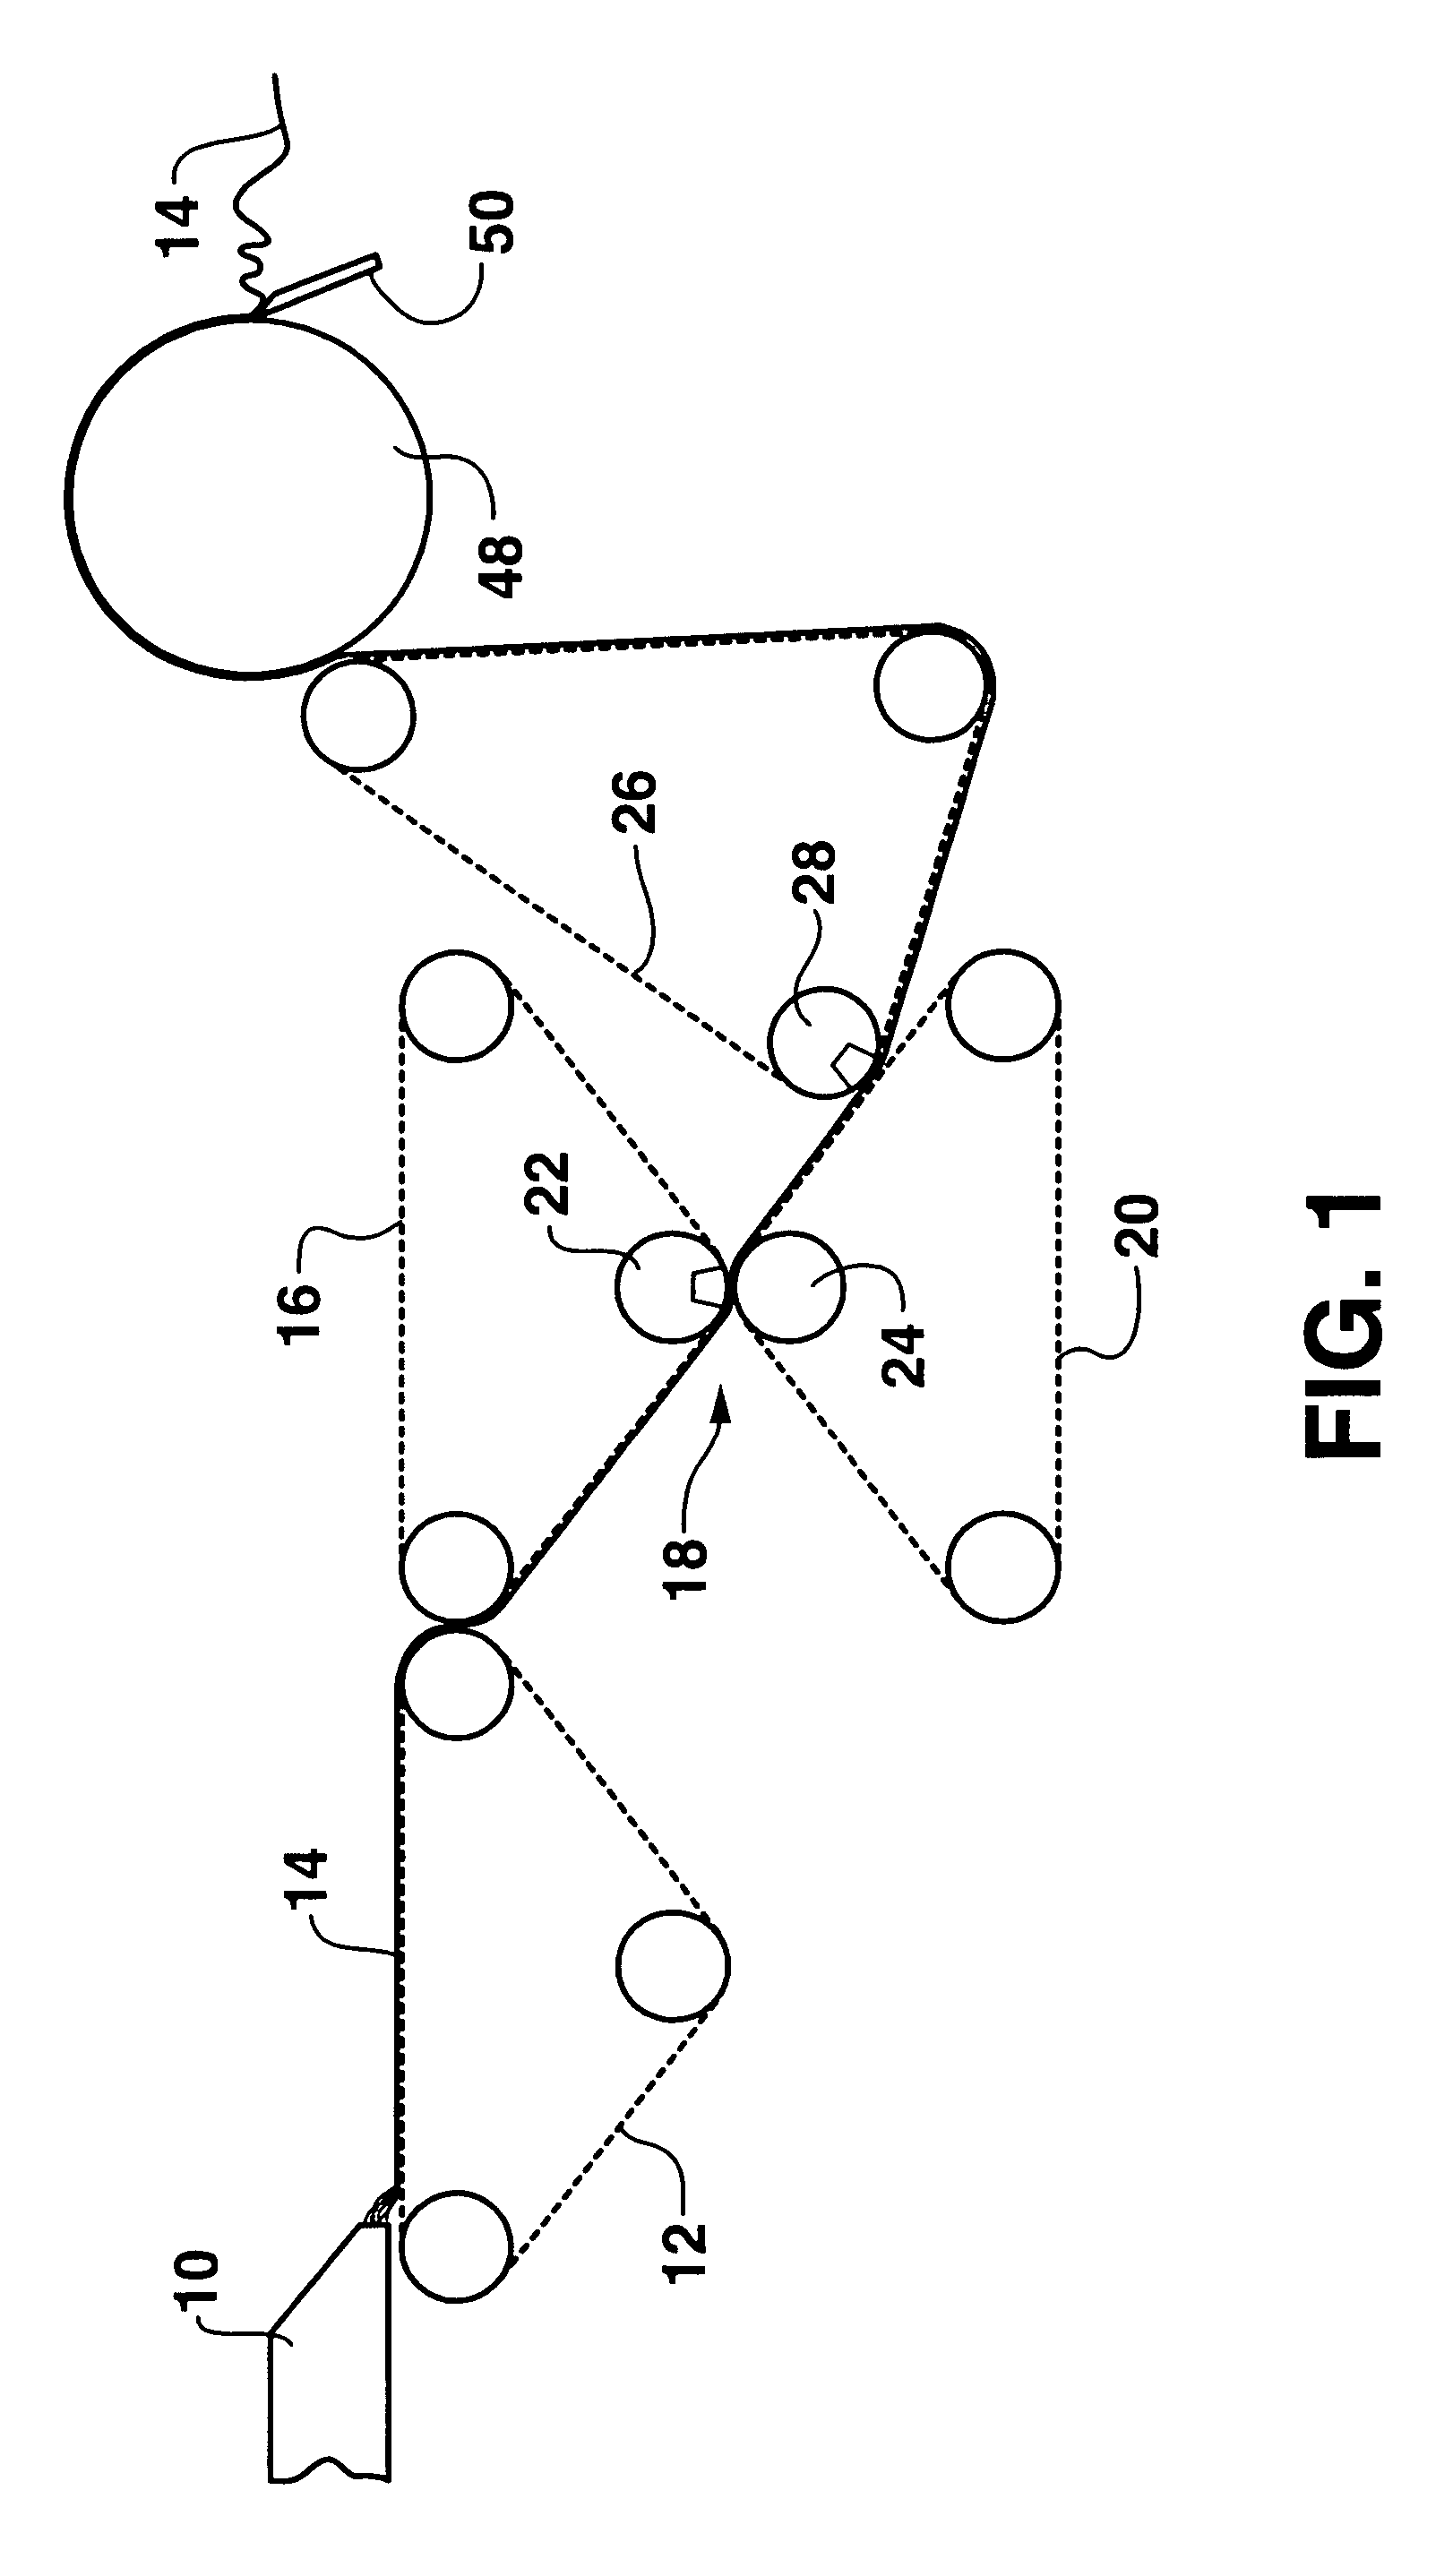 Method for producing wet-pressed, molded tissue products